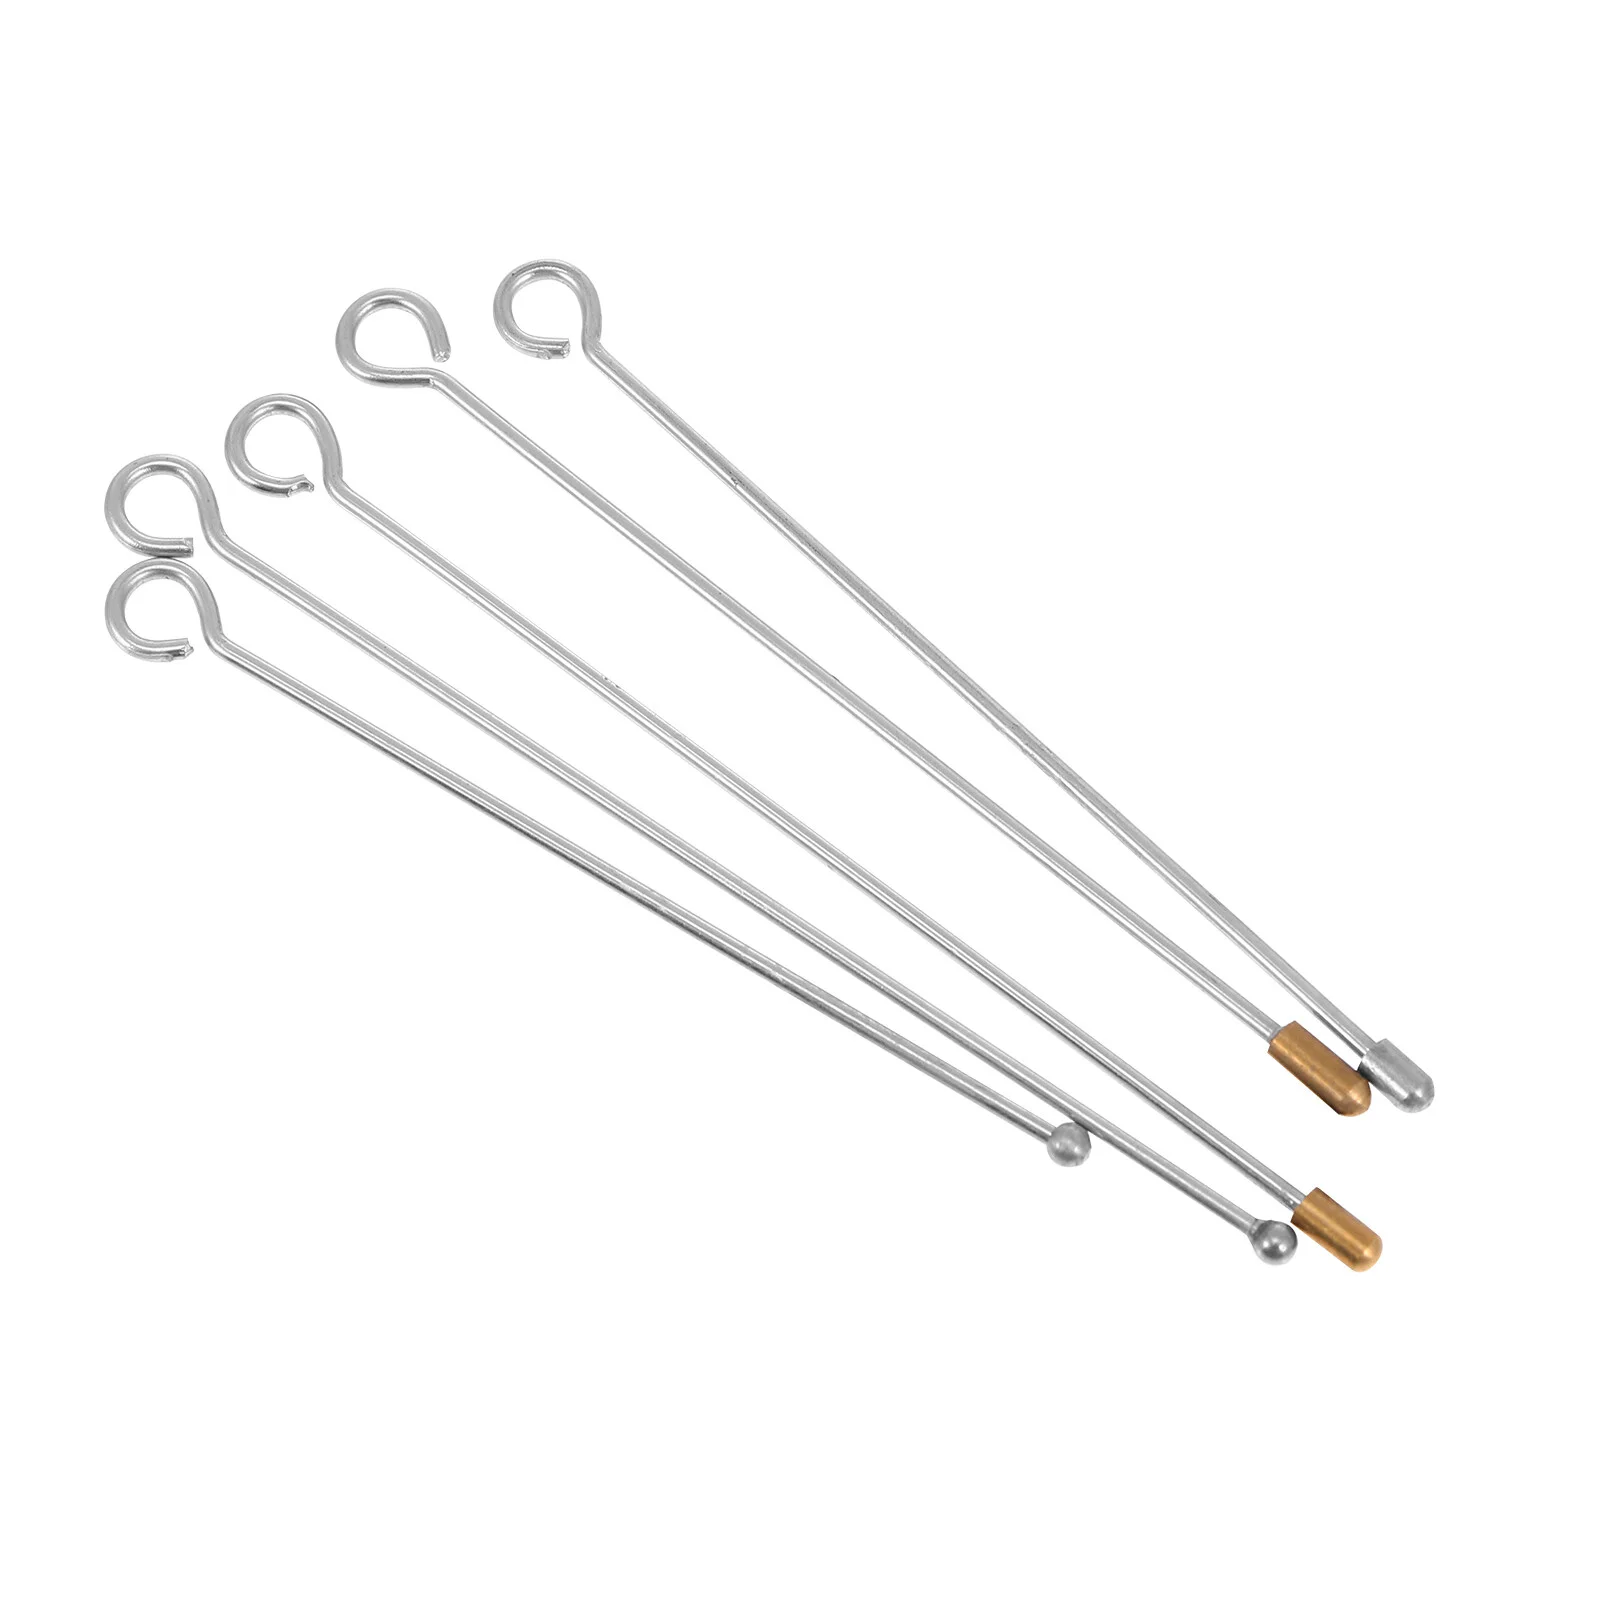 

5 Pcs Tattoo Motor Handle Precision Plunger Bars Tool Accessories Machine Plungers Grip Needle Cartridge Needles Supplies